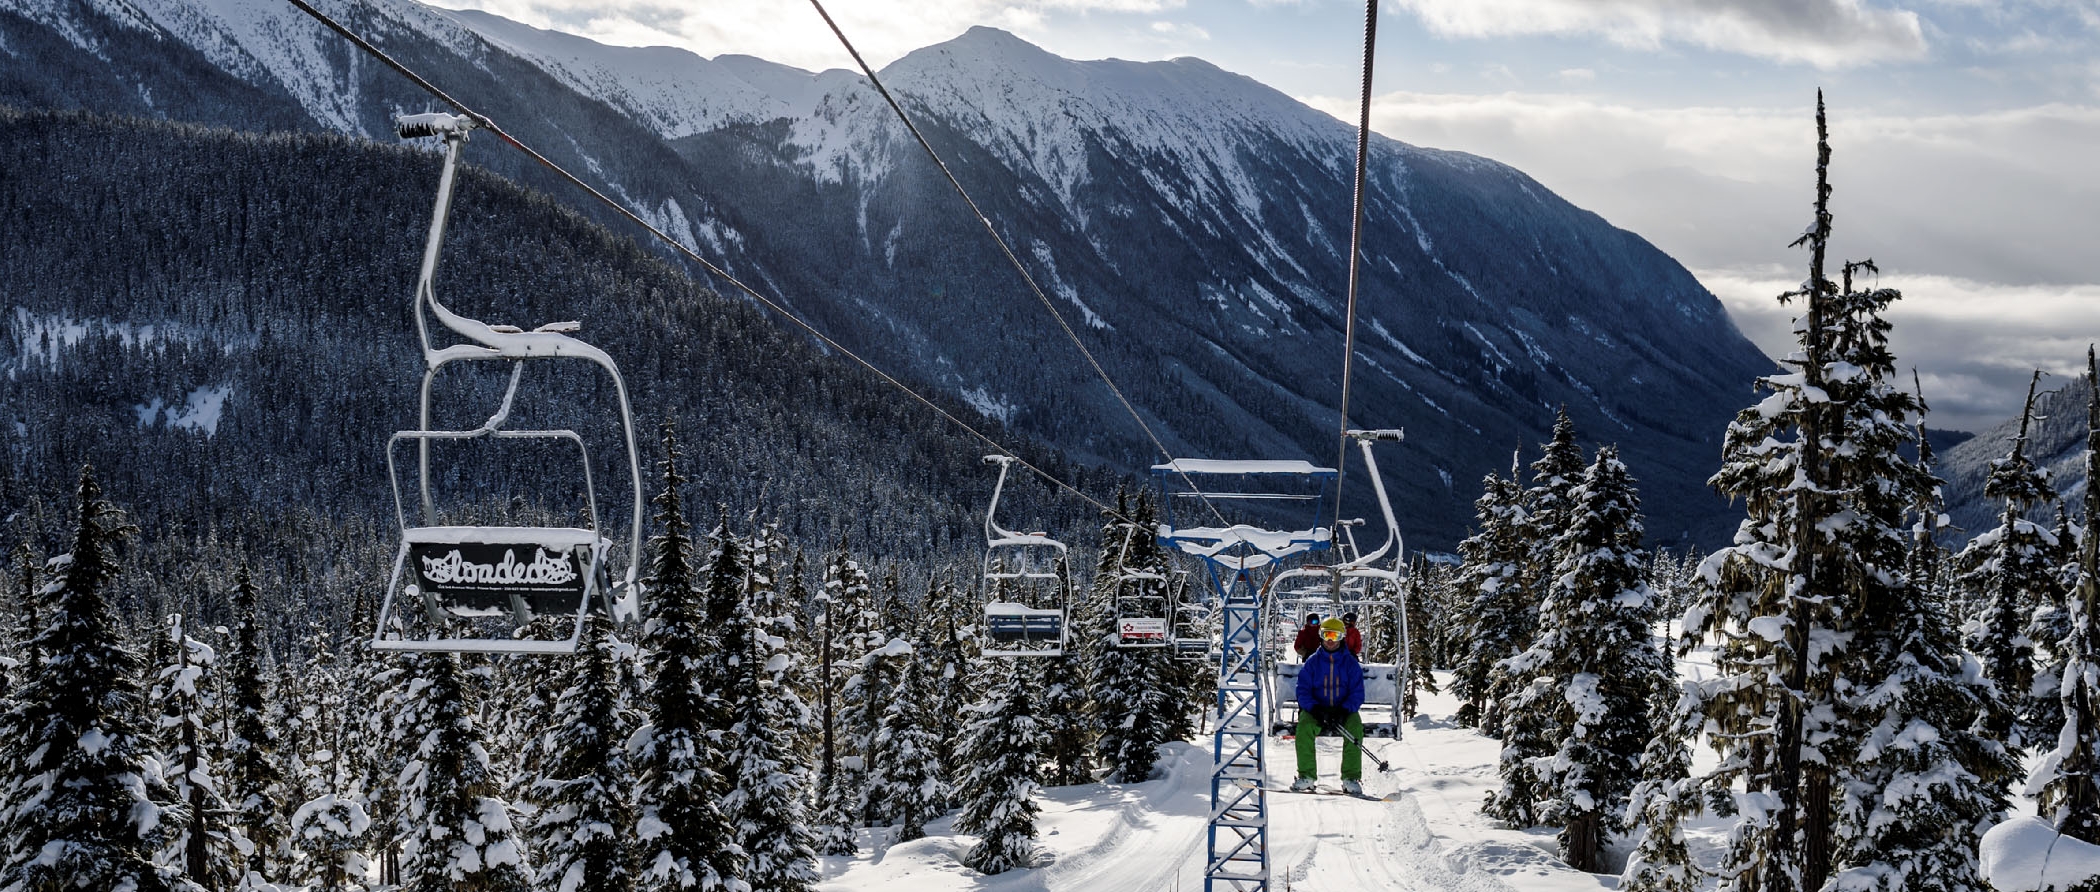 BC’s Community Ski Areas: T-bars, Two-Man Lifts, and Local Ski Culture